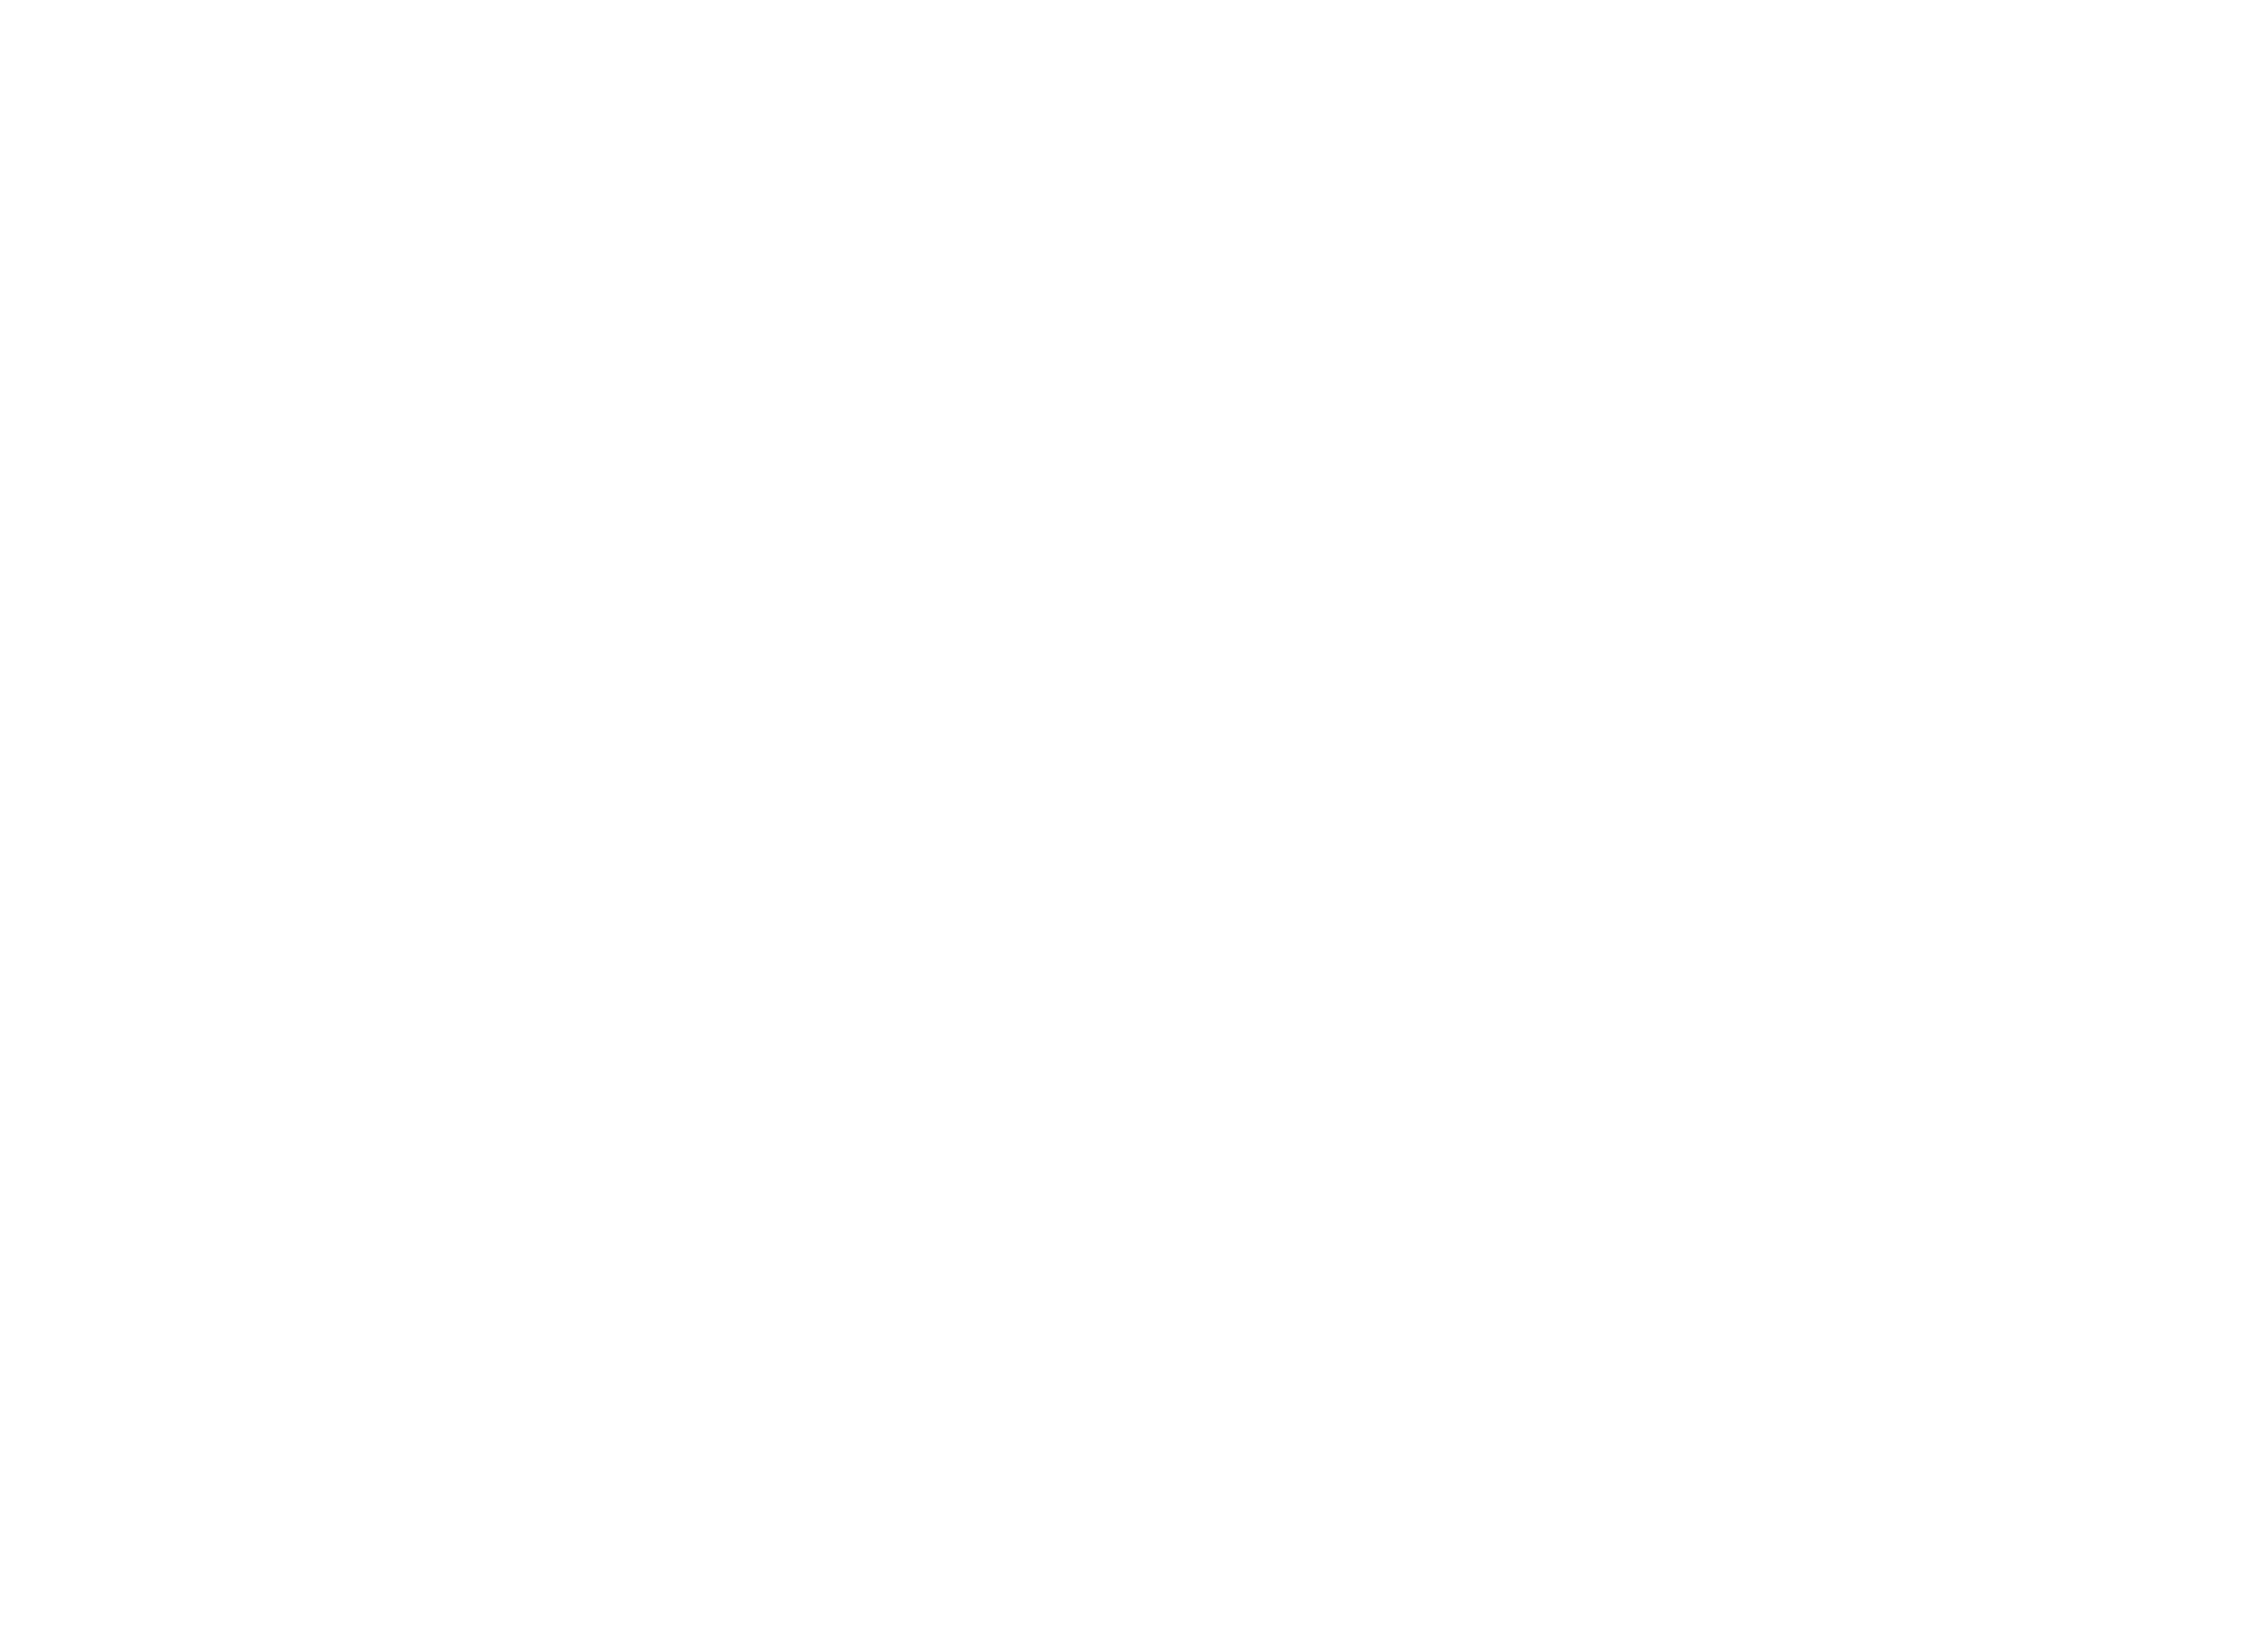 Bicycle Booth